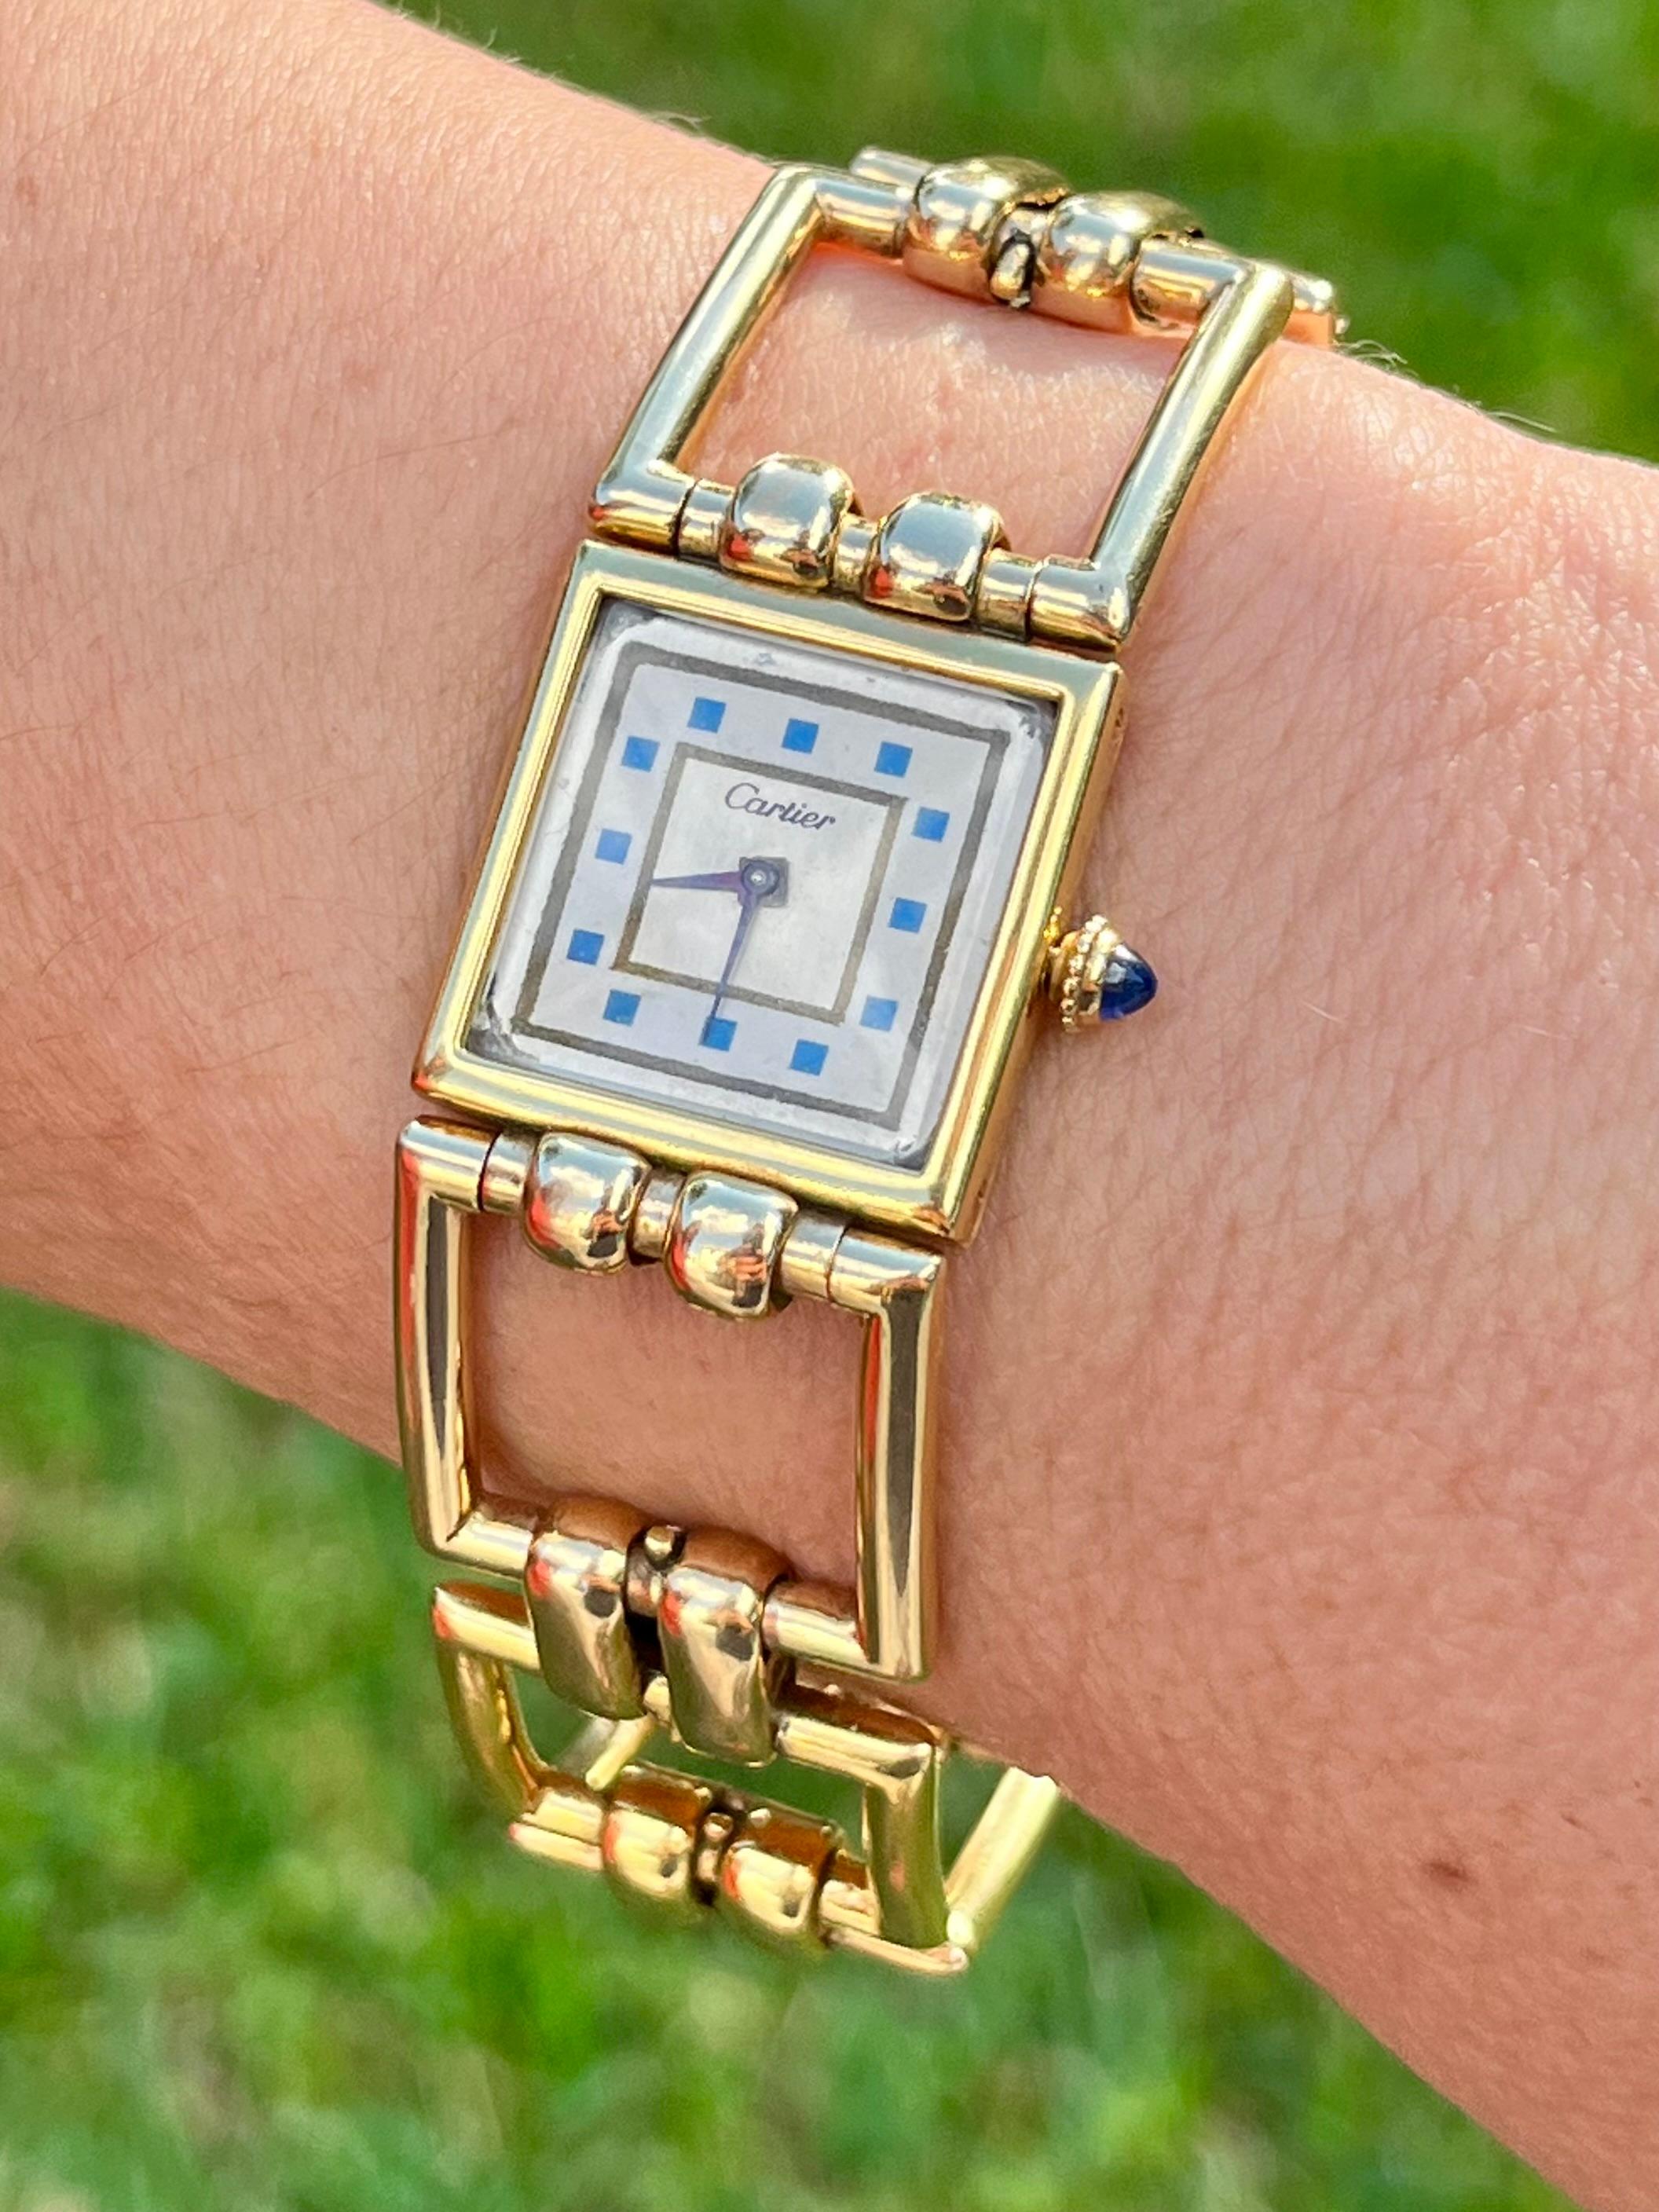 Women's Vintage Cartier Square Link Watch in 14k gold - 21mm - Laides Cartier Watch